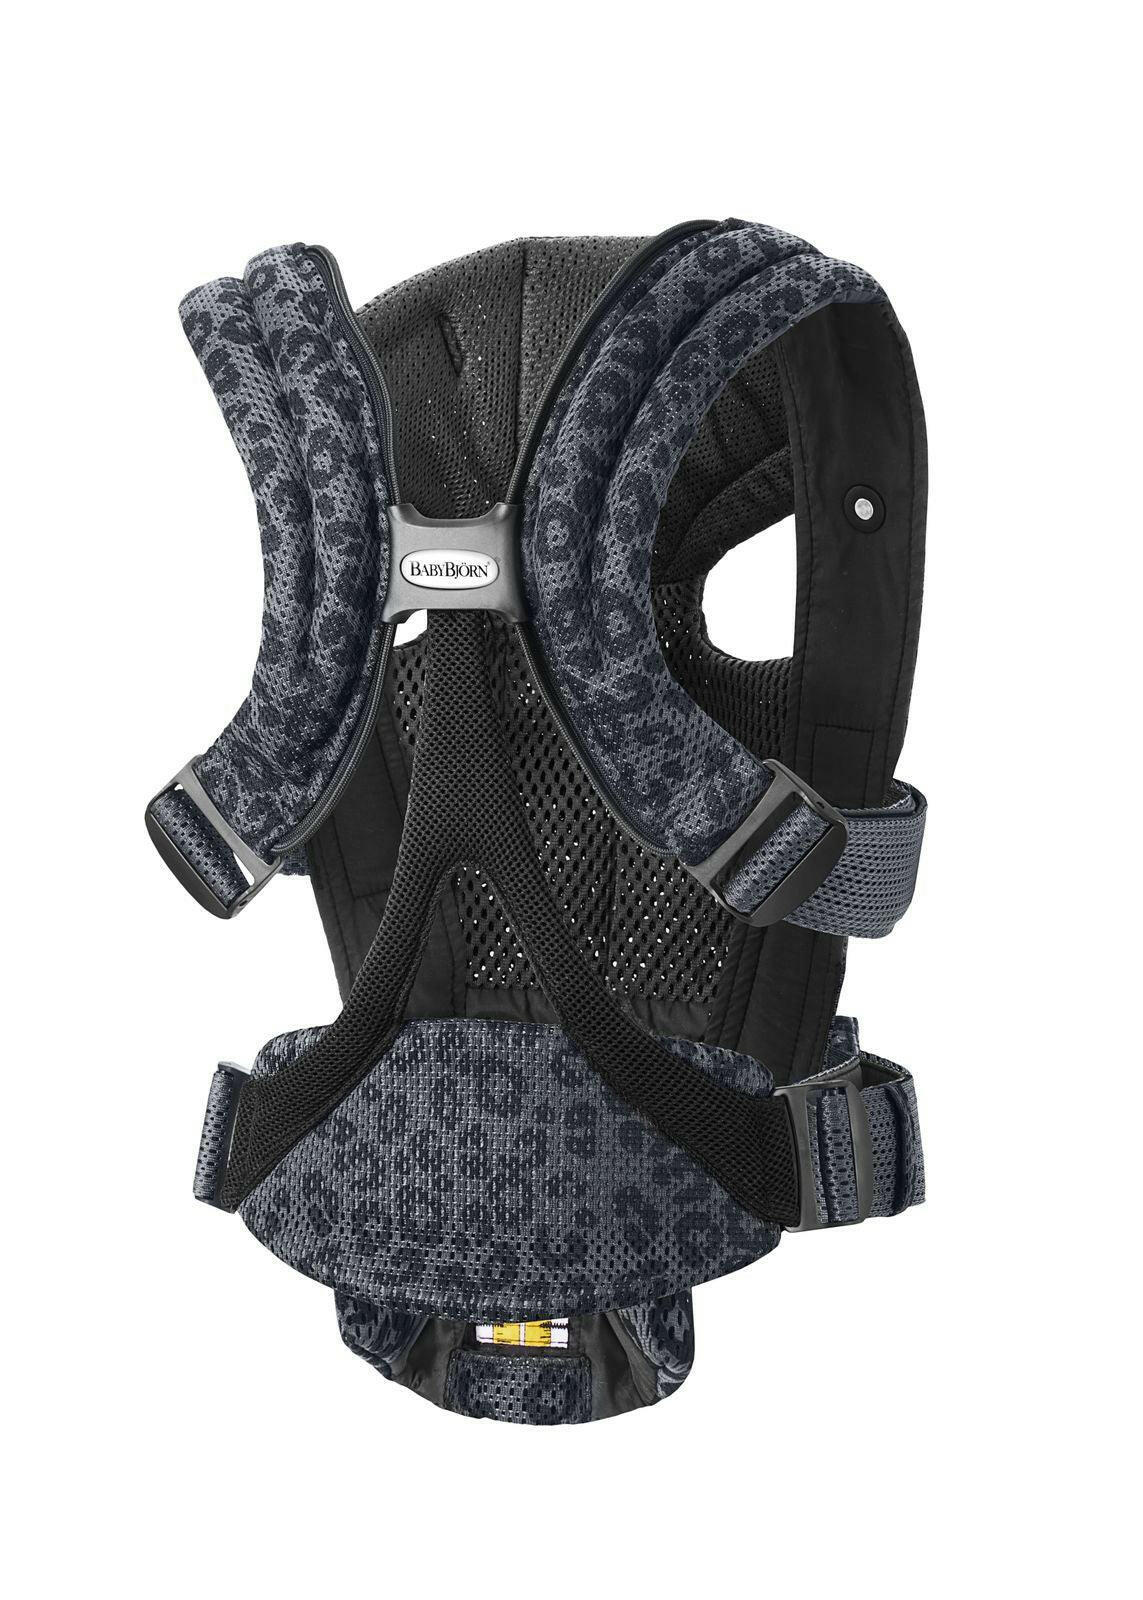 Baby Bjorn Baby Carrier Free 3D Mesh - Anthracite Leopard - Traveling Tikes 